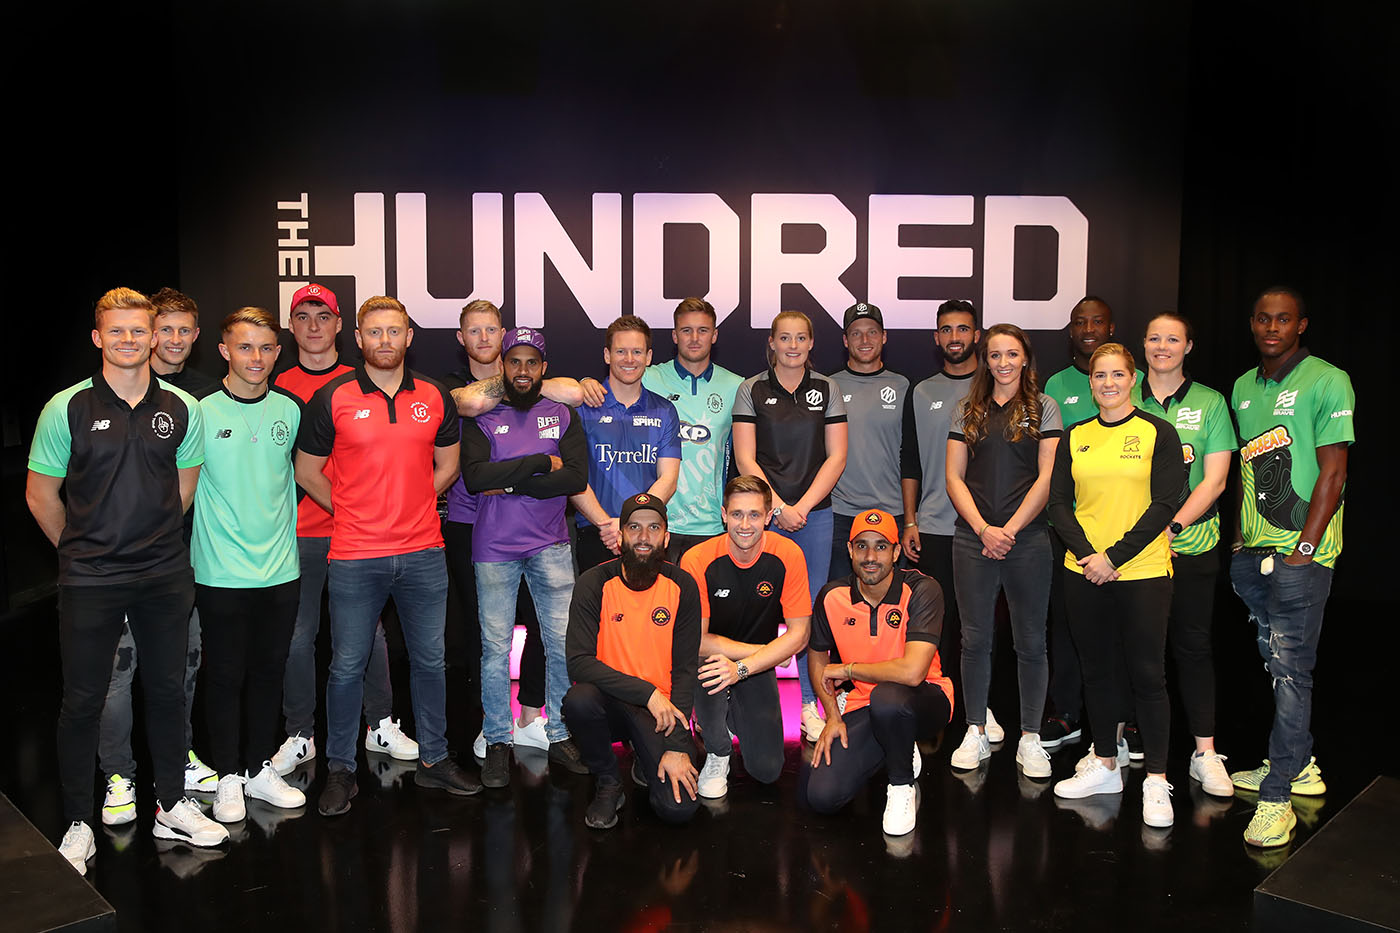 The Hundred is a the new 100-ball cricket brought by ECB